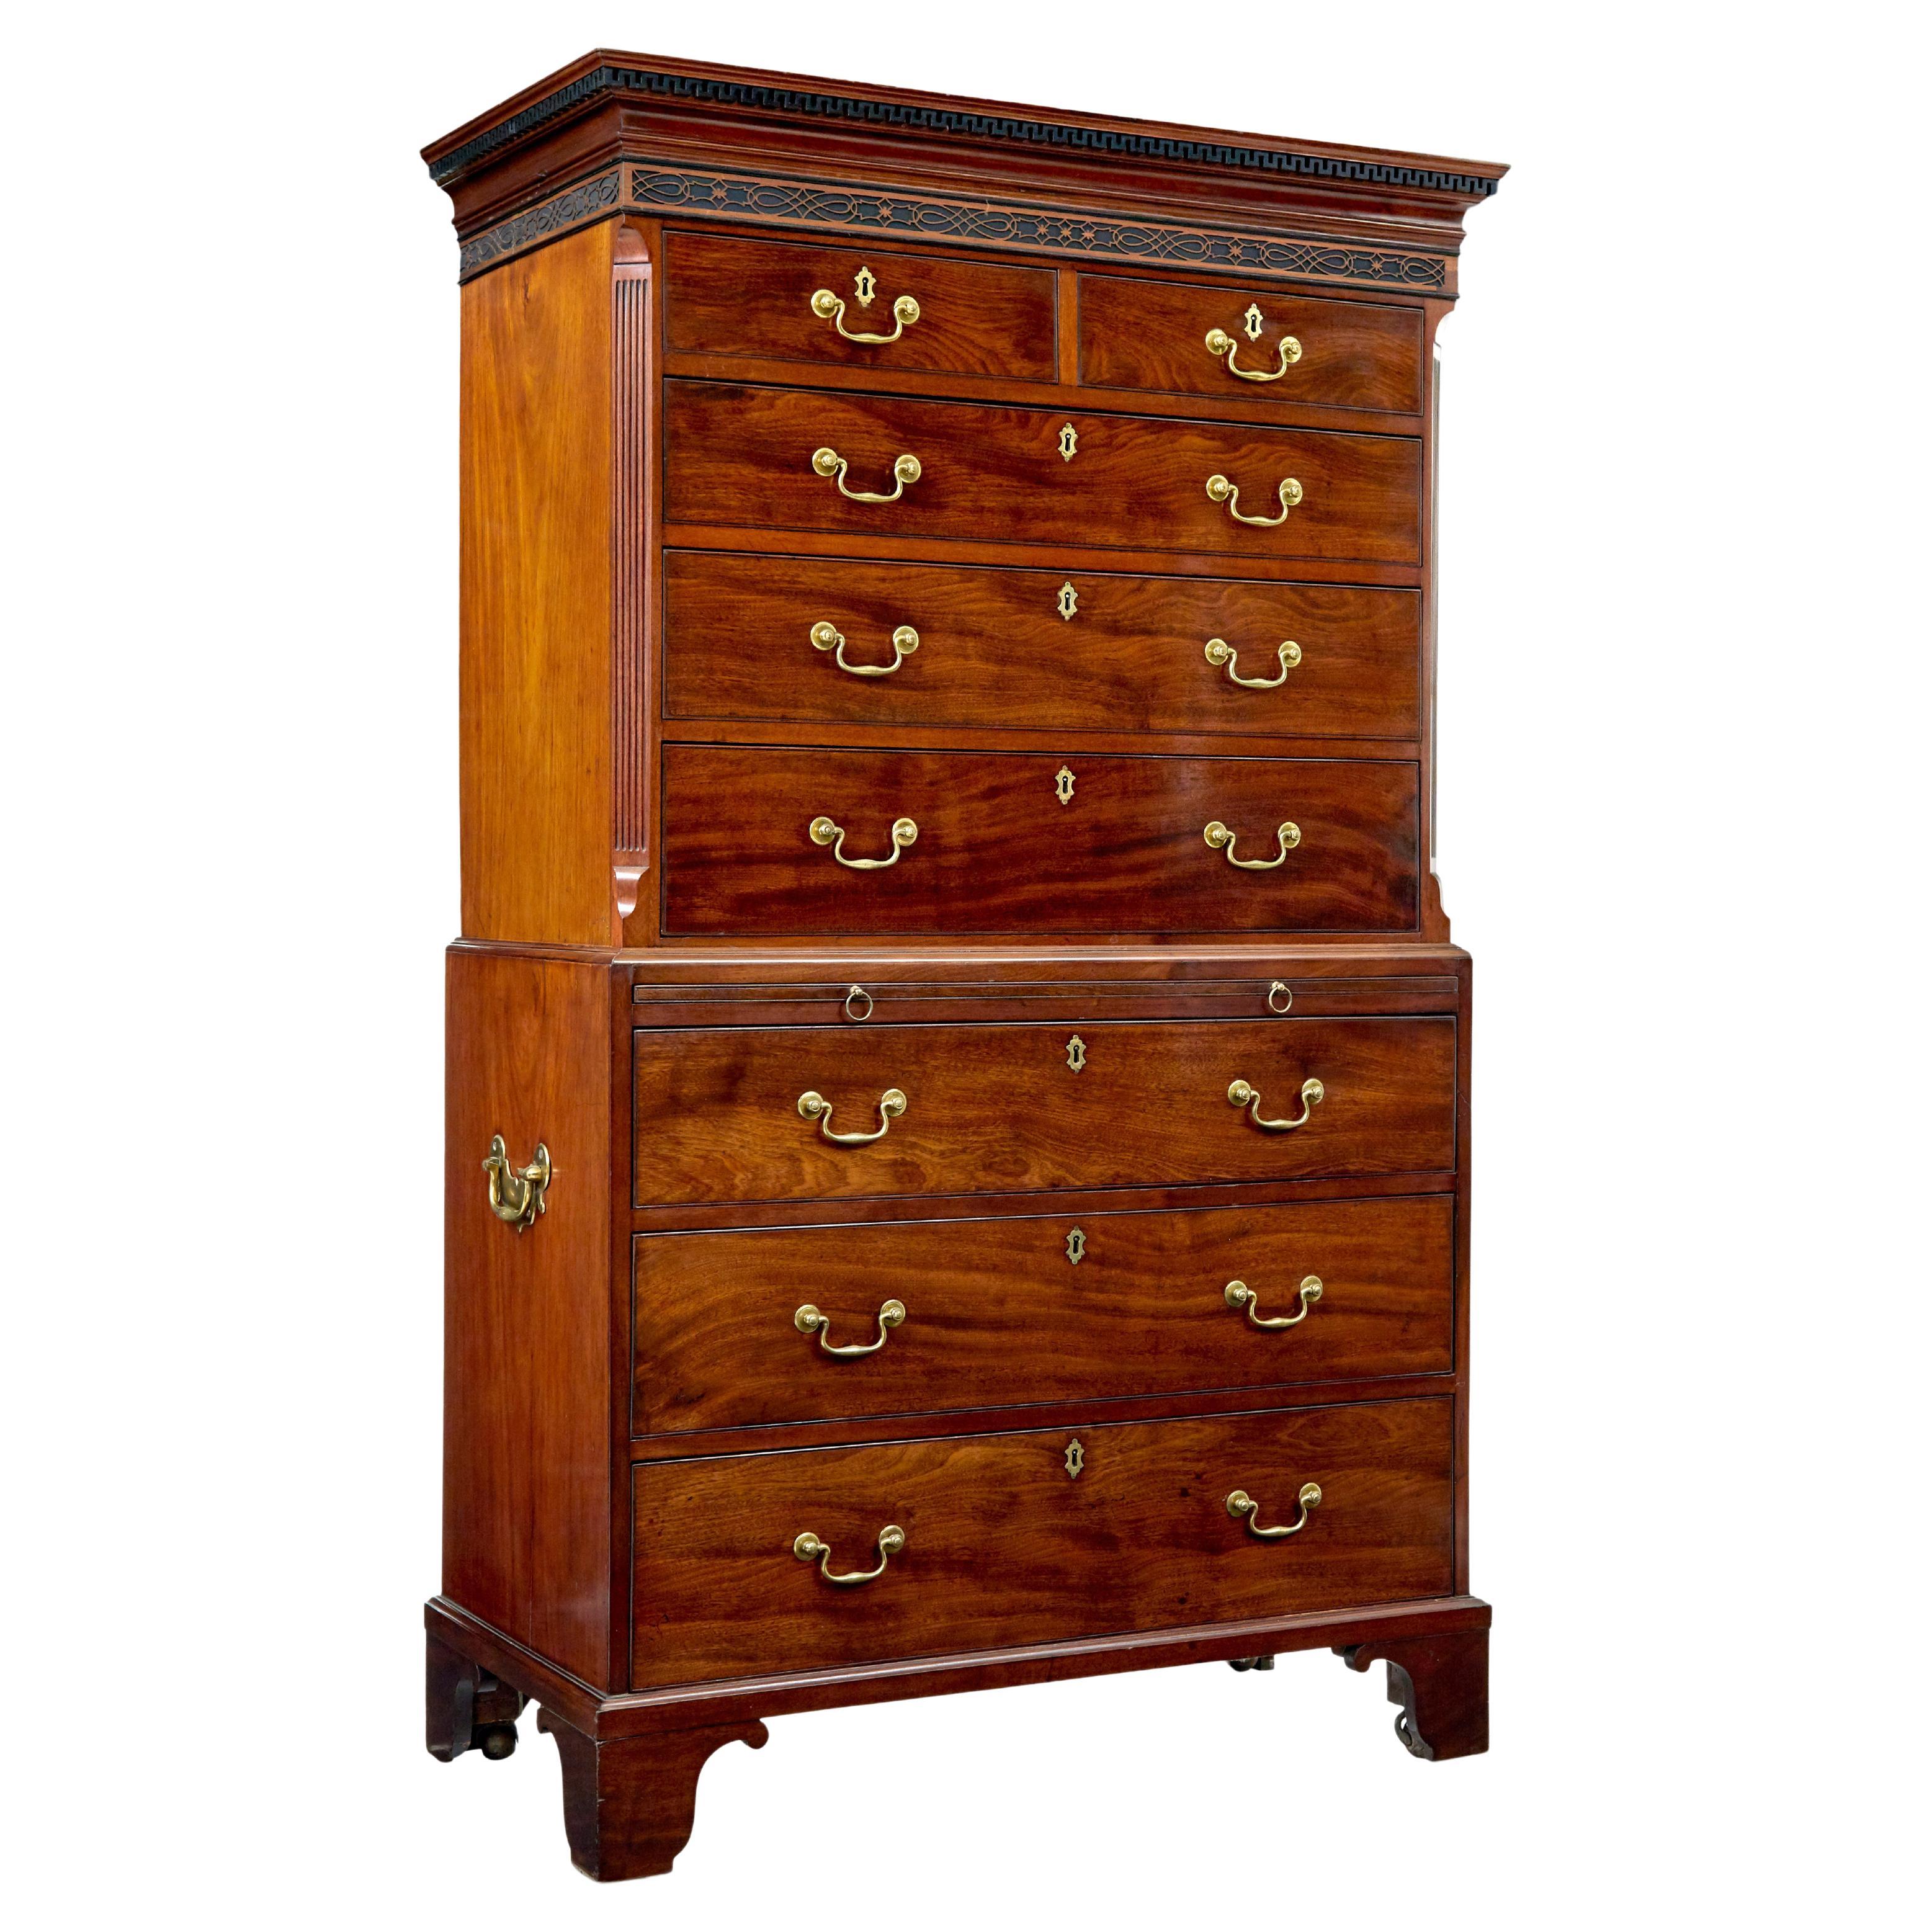 Early 19th century channel island mahogany chest on chest For Sale